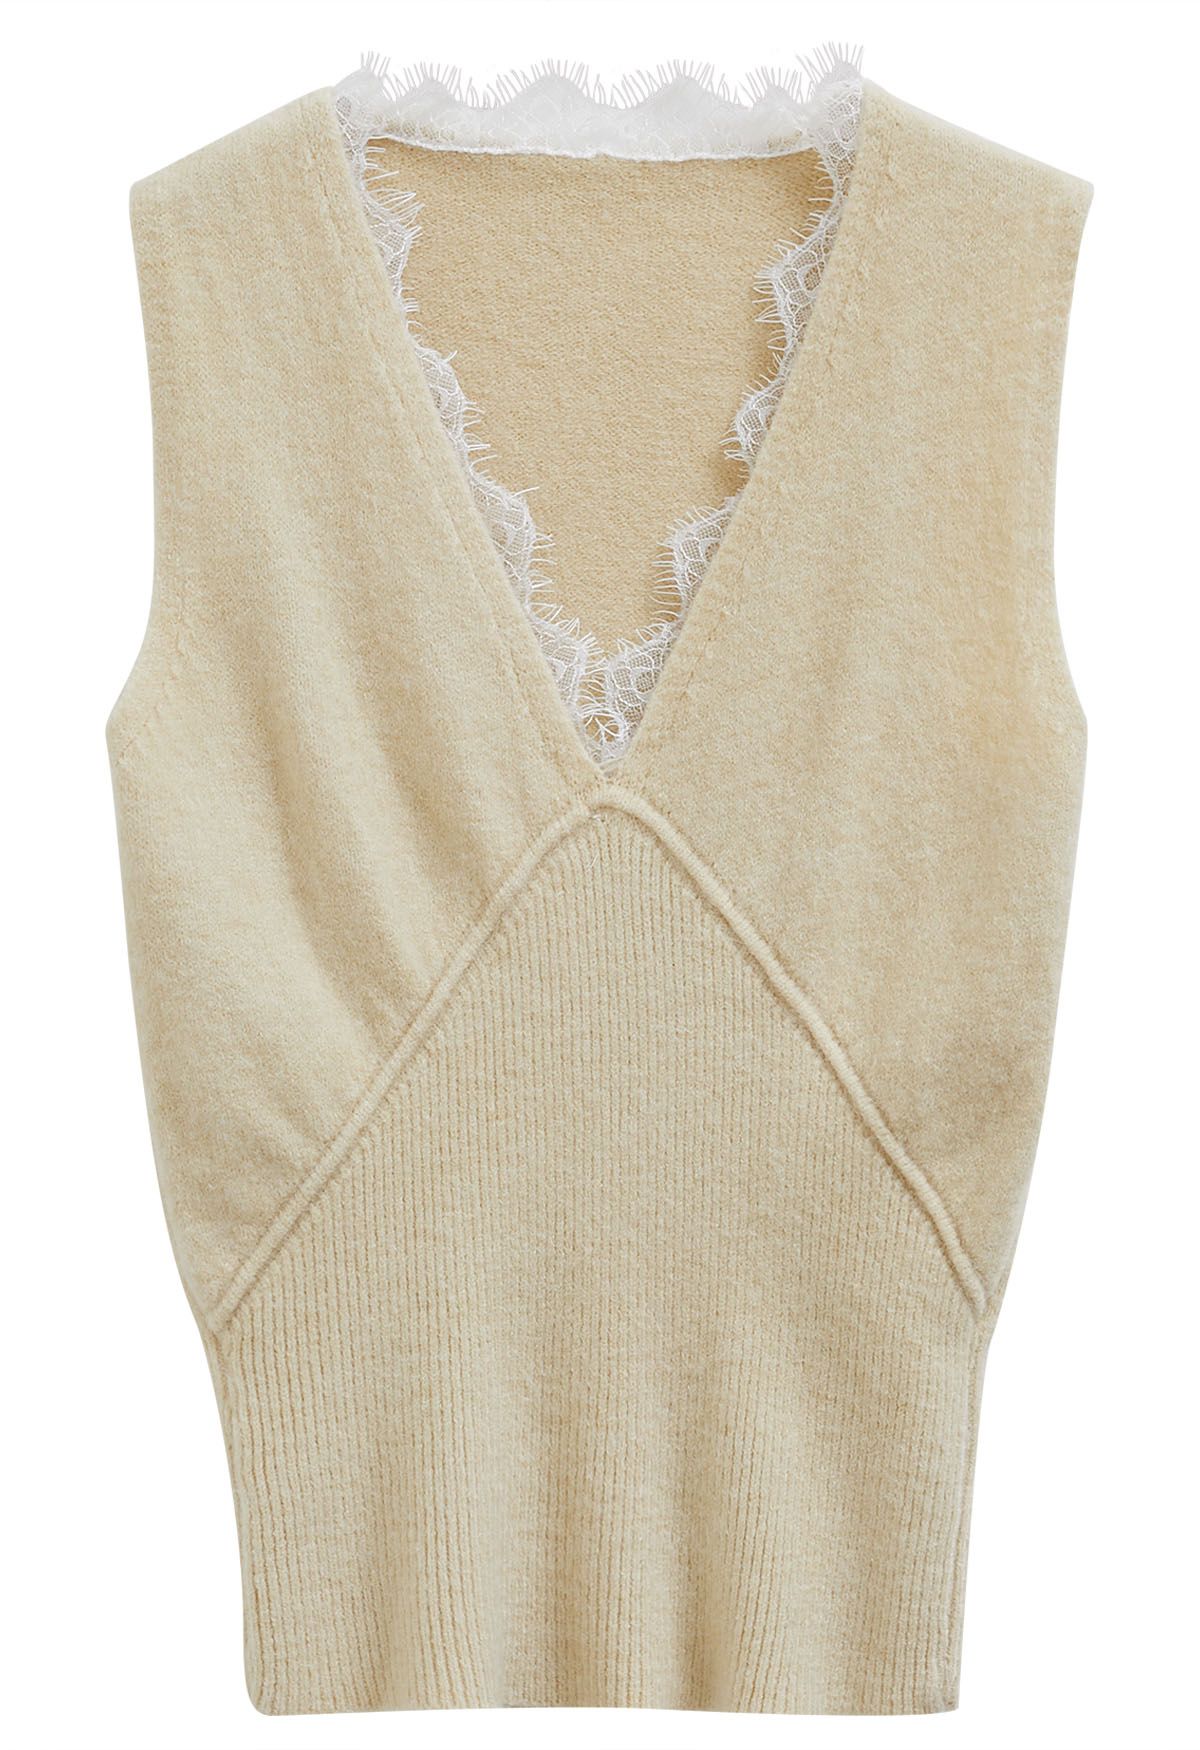 Lacy V-Neck Sleeveless Top and Cardigan Set in Light Yellow